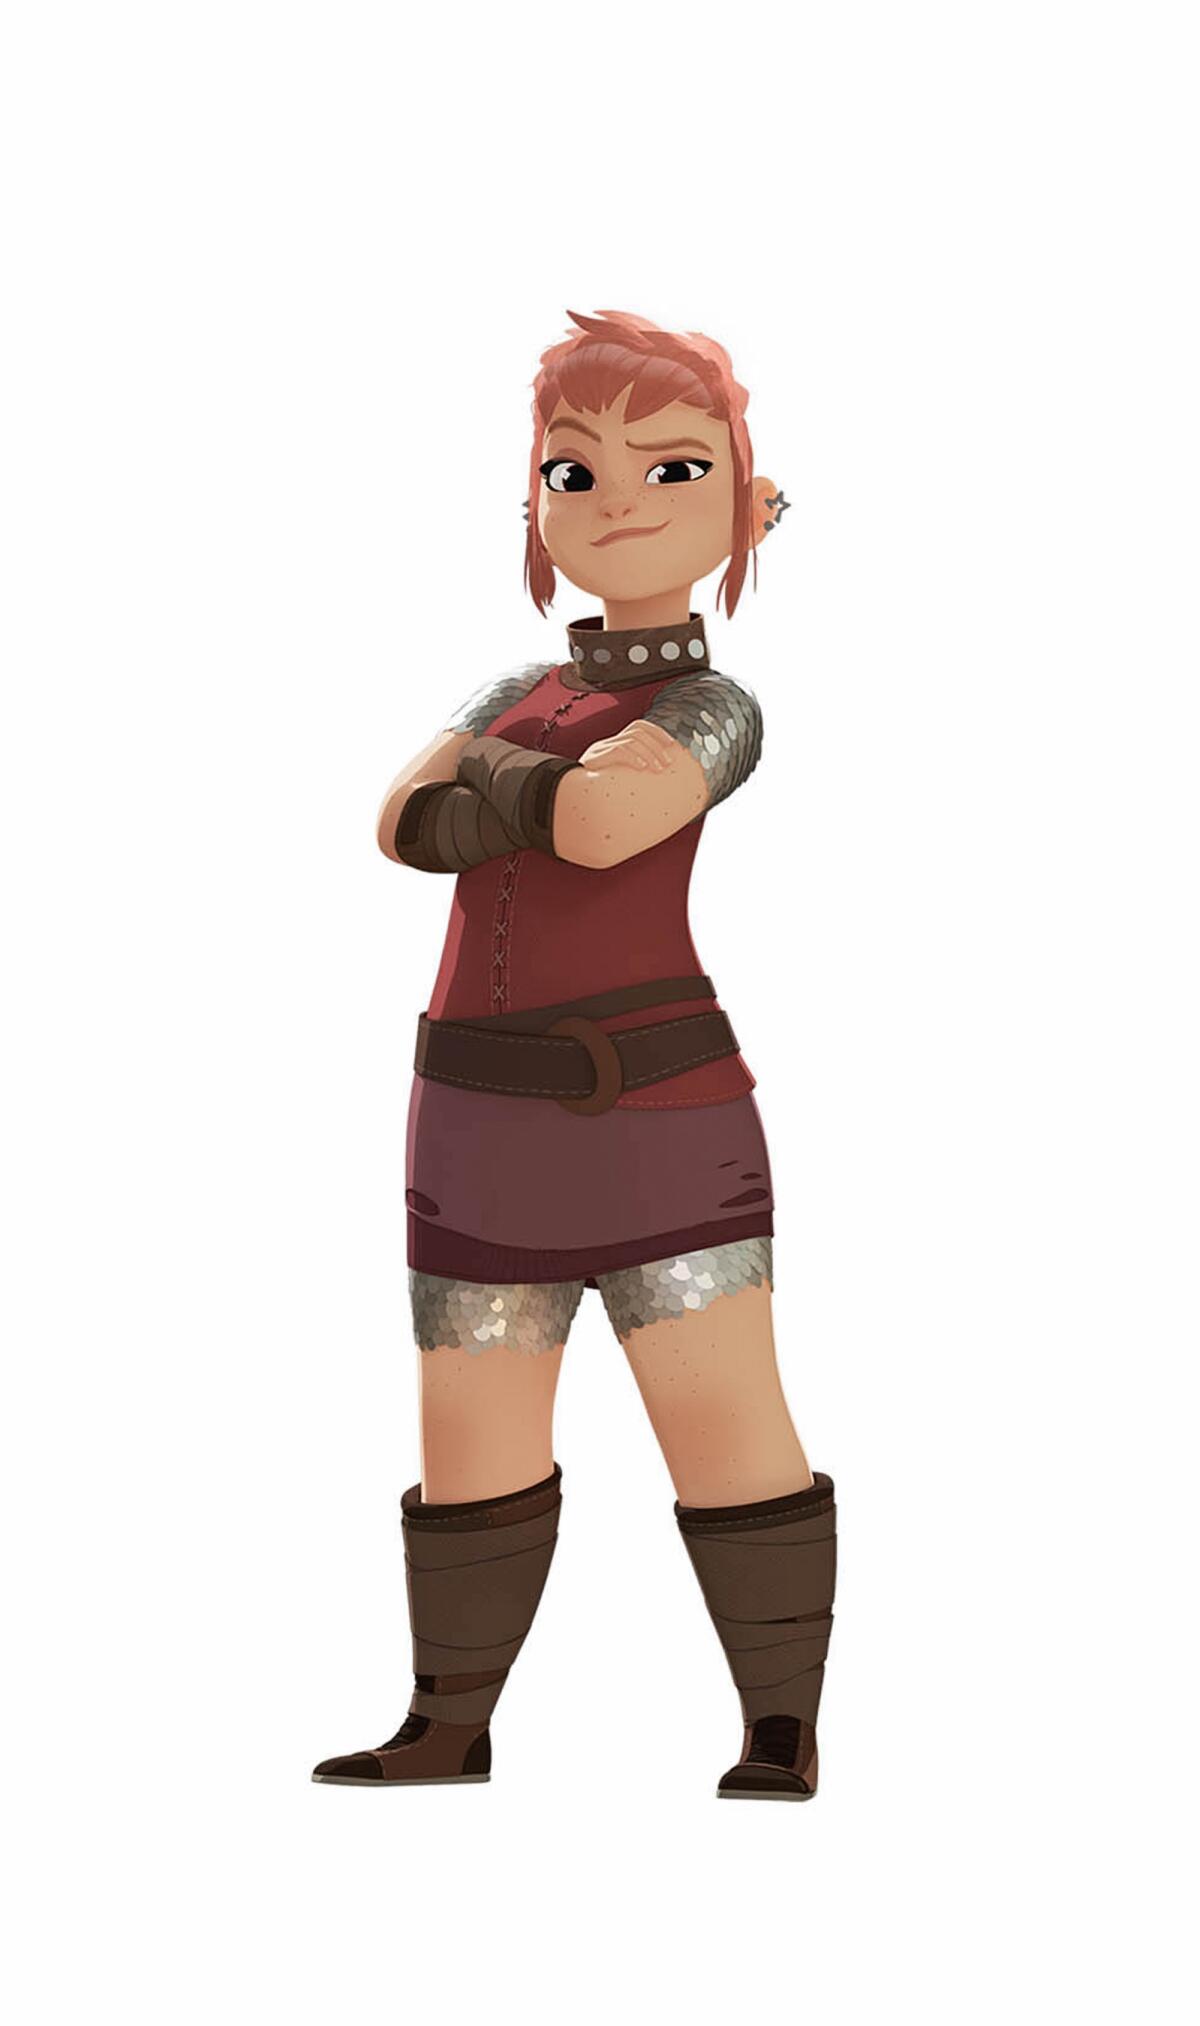 Nimona standing with her arms crossed